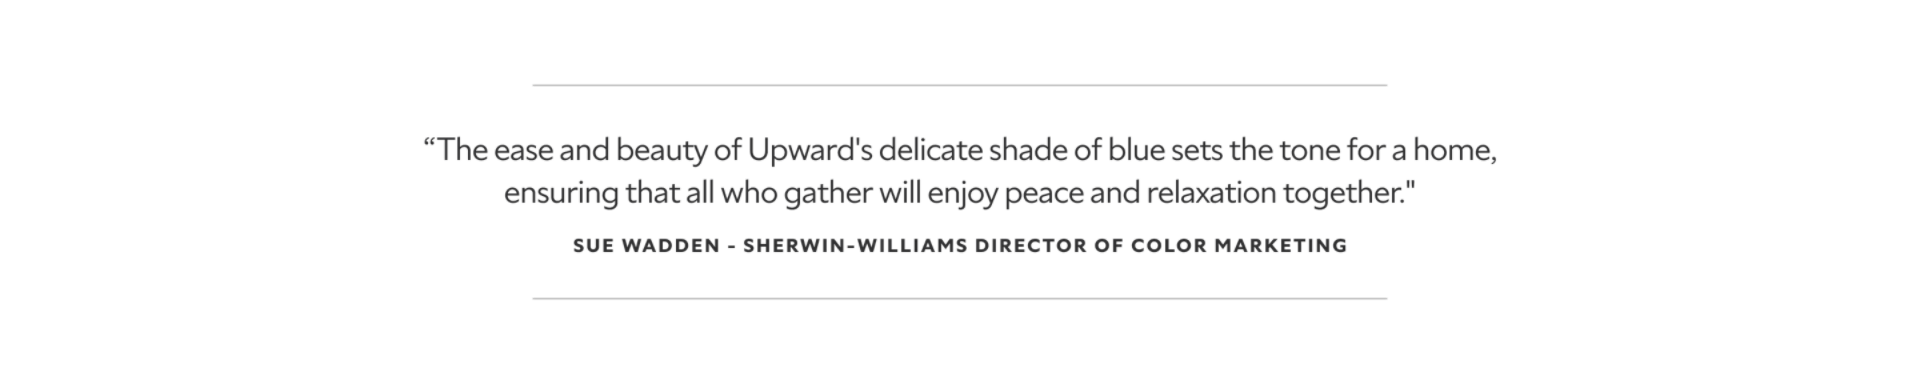 A quote from Sue Wadden, the Sherwin-Williams Director of Color Marketing. The ease and beauty of Upward's delicate shade of blue sets the tone for a home, ensuring that all who gather will enjoy peace and relaxation together.